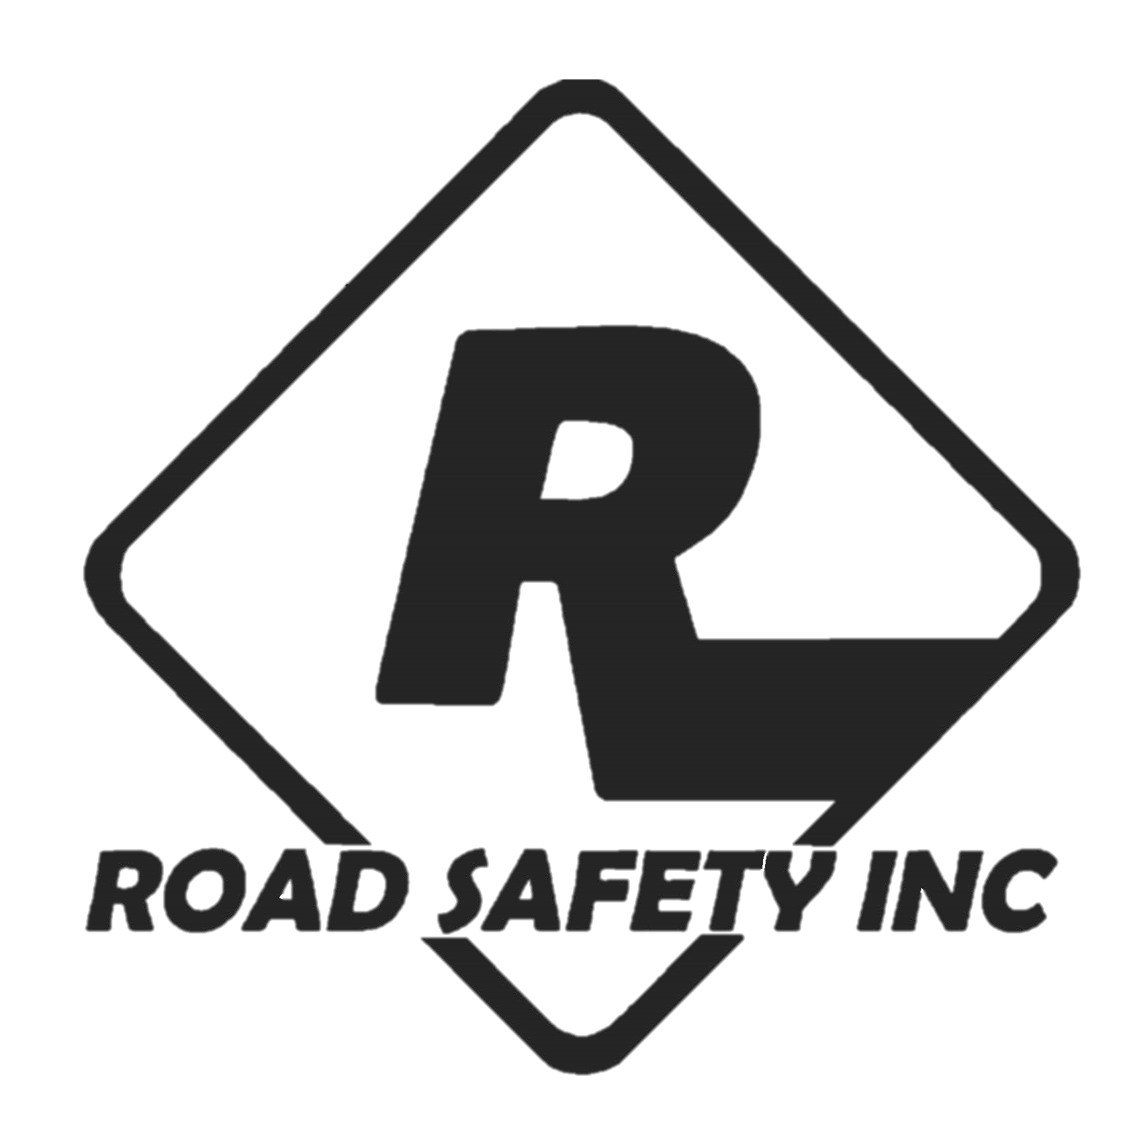 Road Safety Inc. Monthly Truck Inspection 